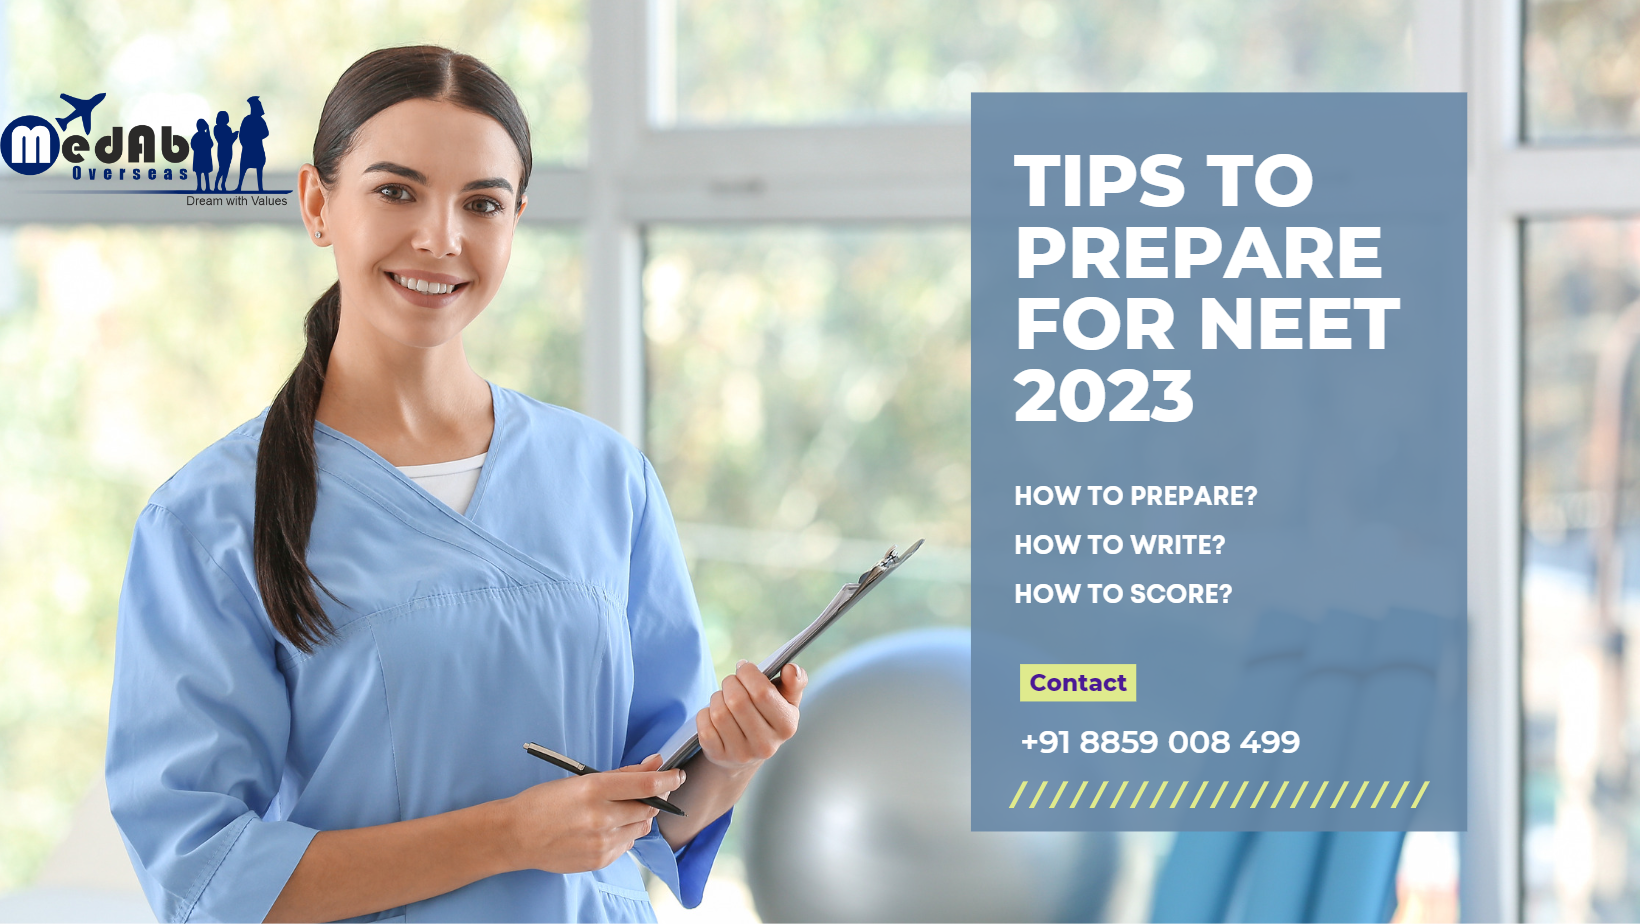 Tips To Prepare For NEET 2023